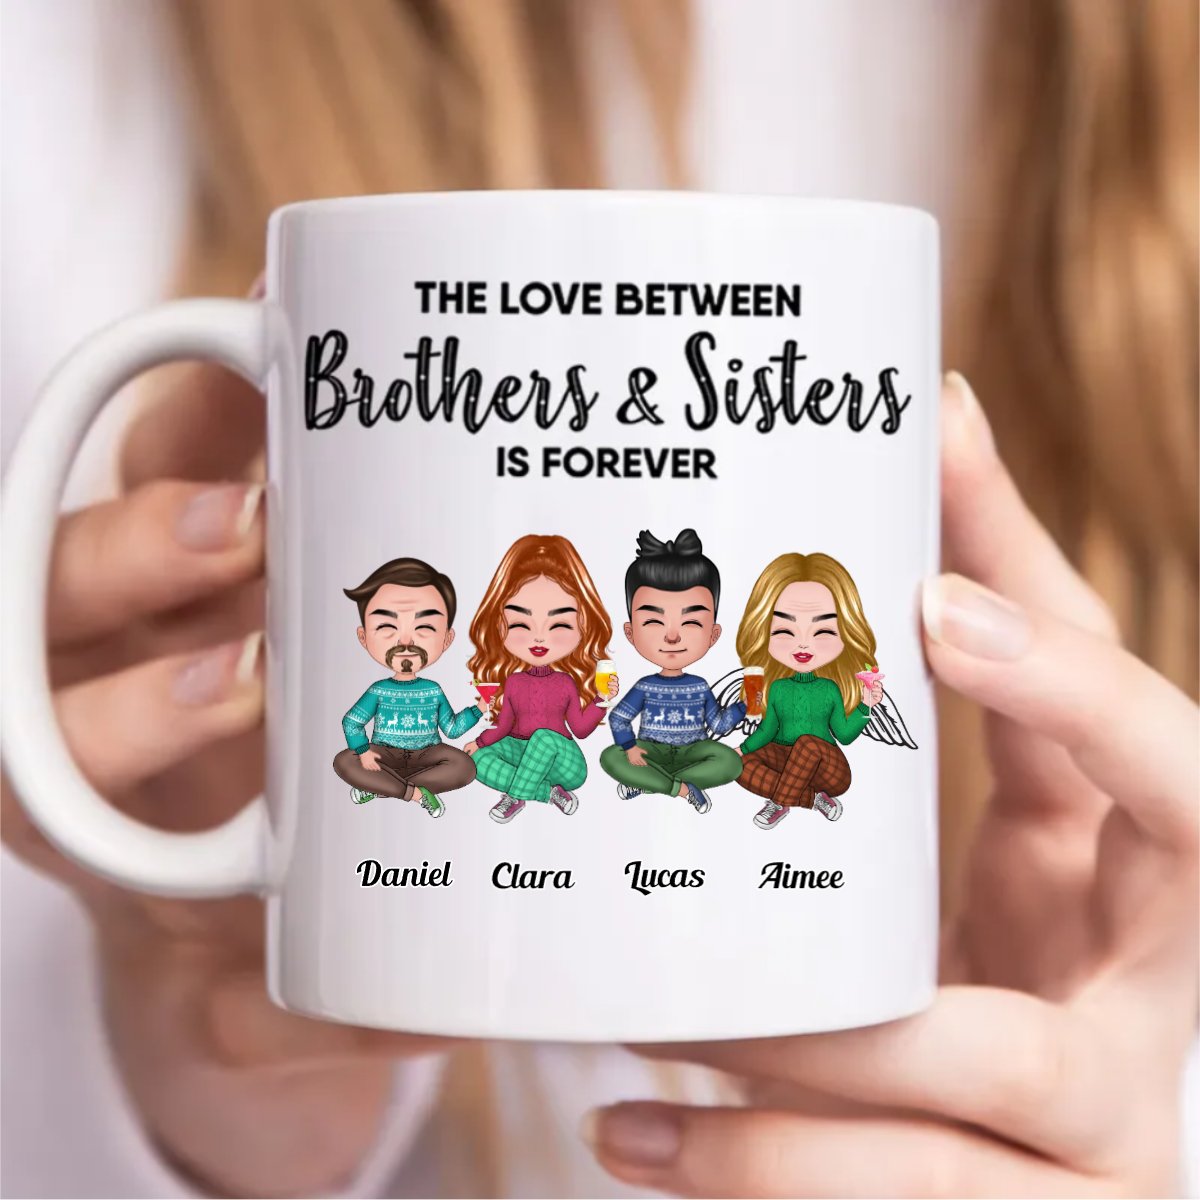 The Love Between Brothers & Sisters Is Forever - Personalized Mug - The Next Custom Gift